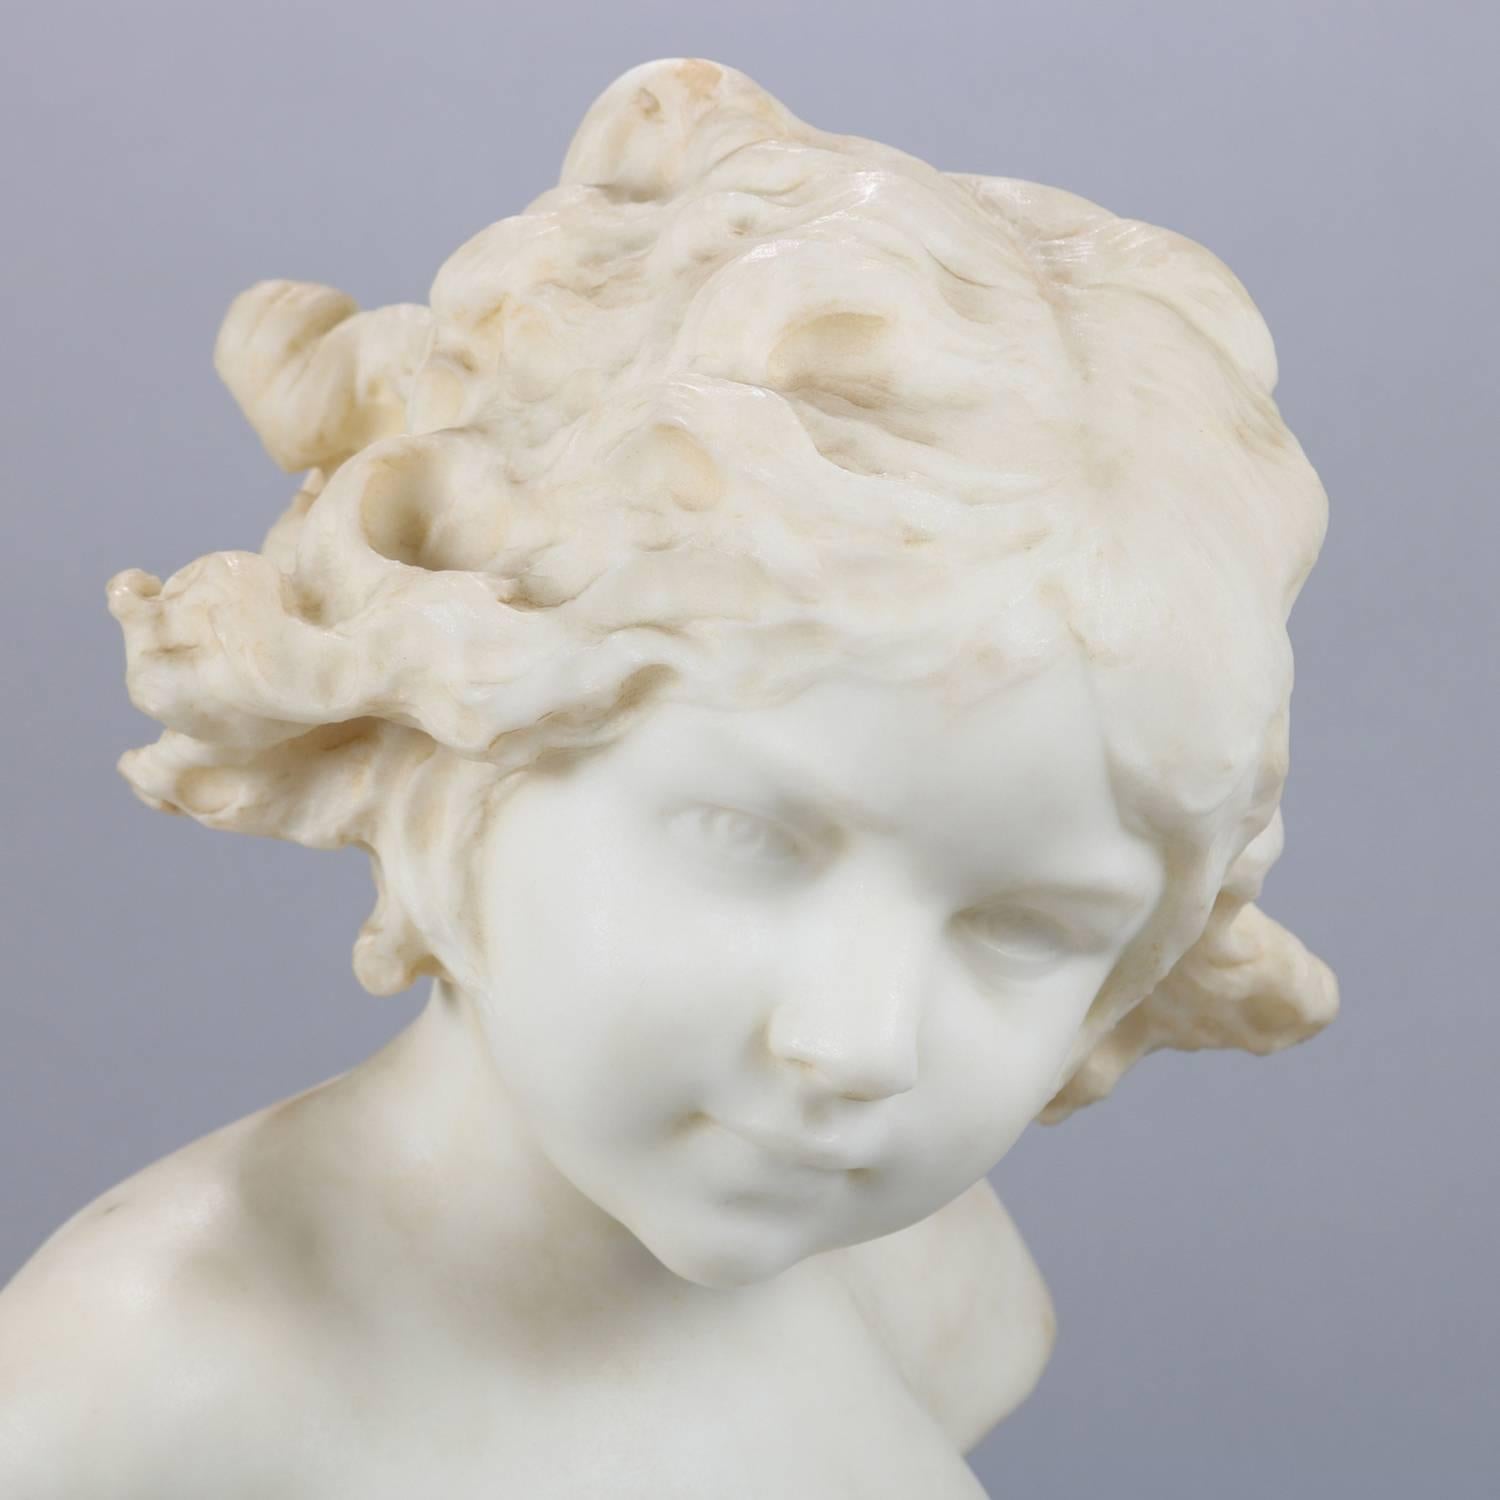 Antique Italian well executed carved marble portrait bust of a young girl, circa 1880

Measures: 17.5